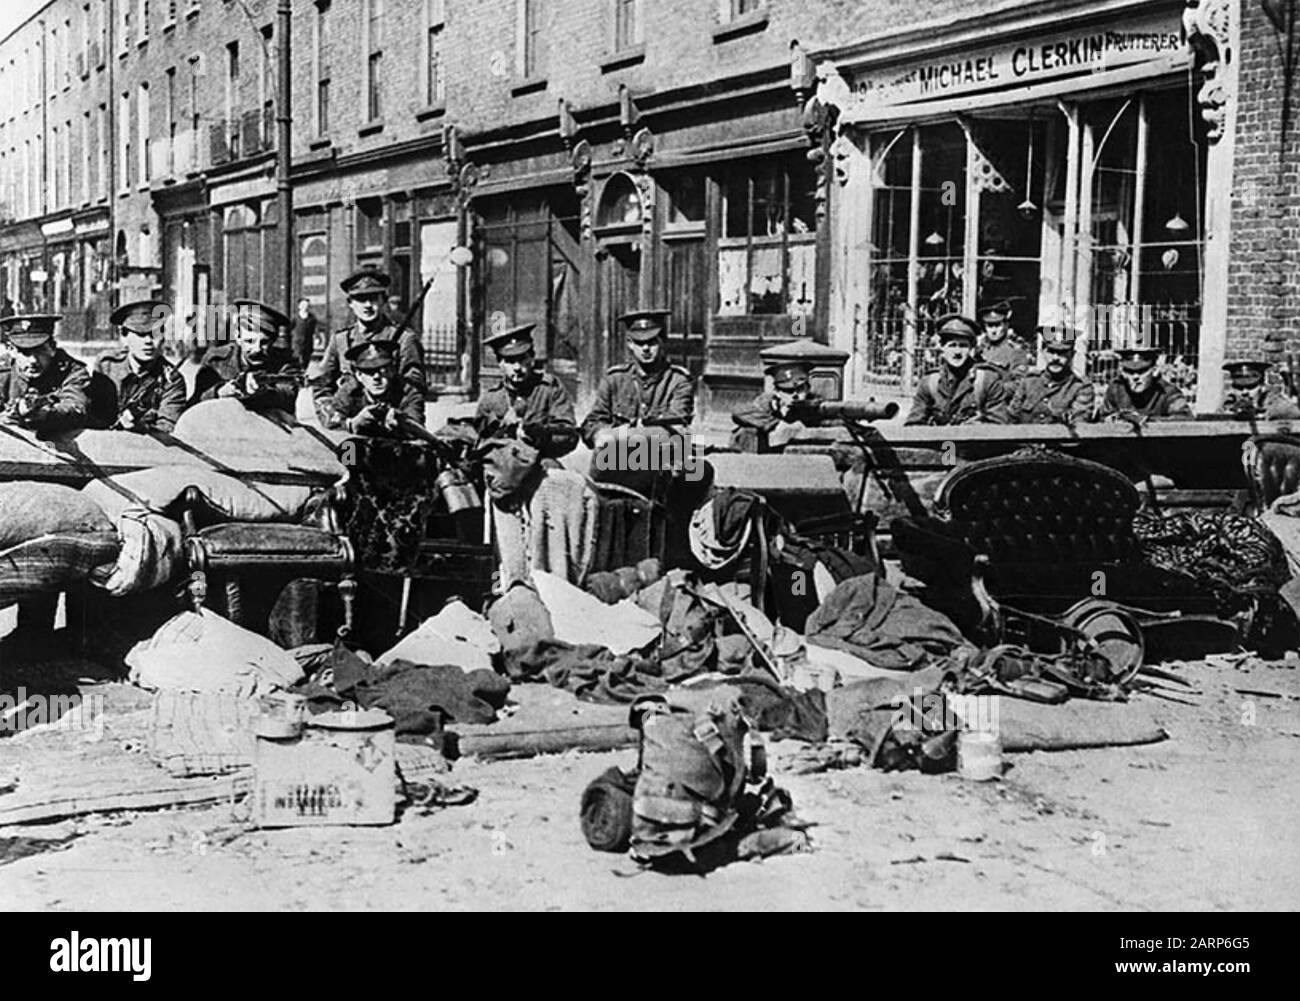 EASTER RISING April 1916. British soldiers behind an improvised barricade in Dublin Stock Photo